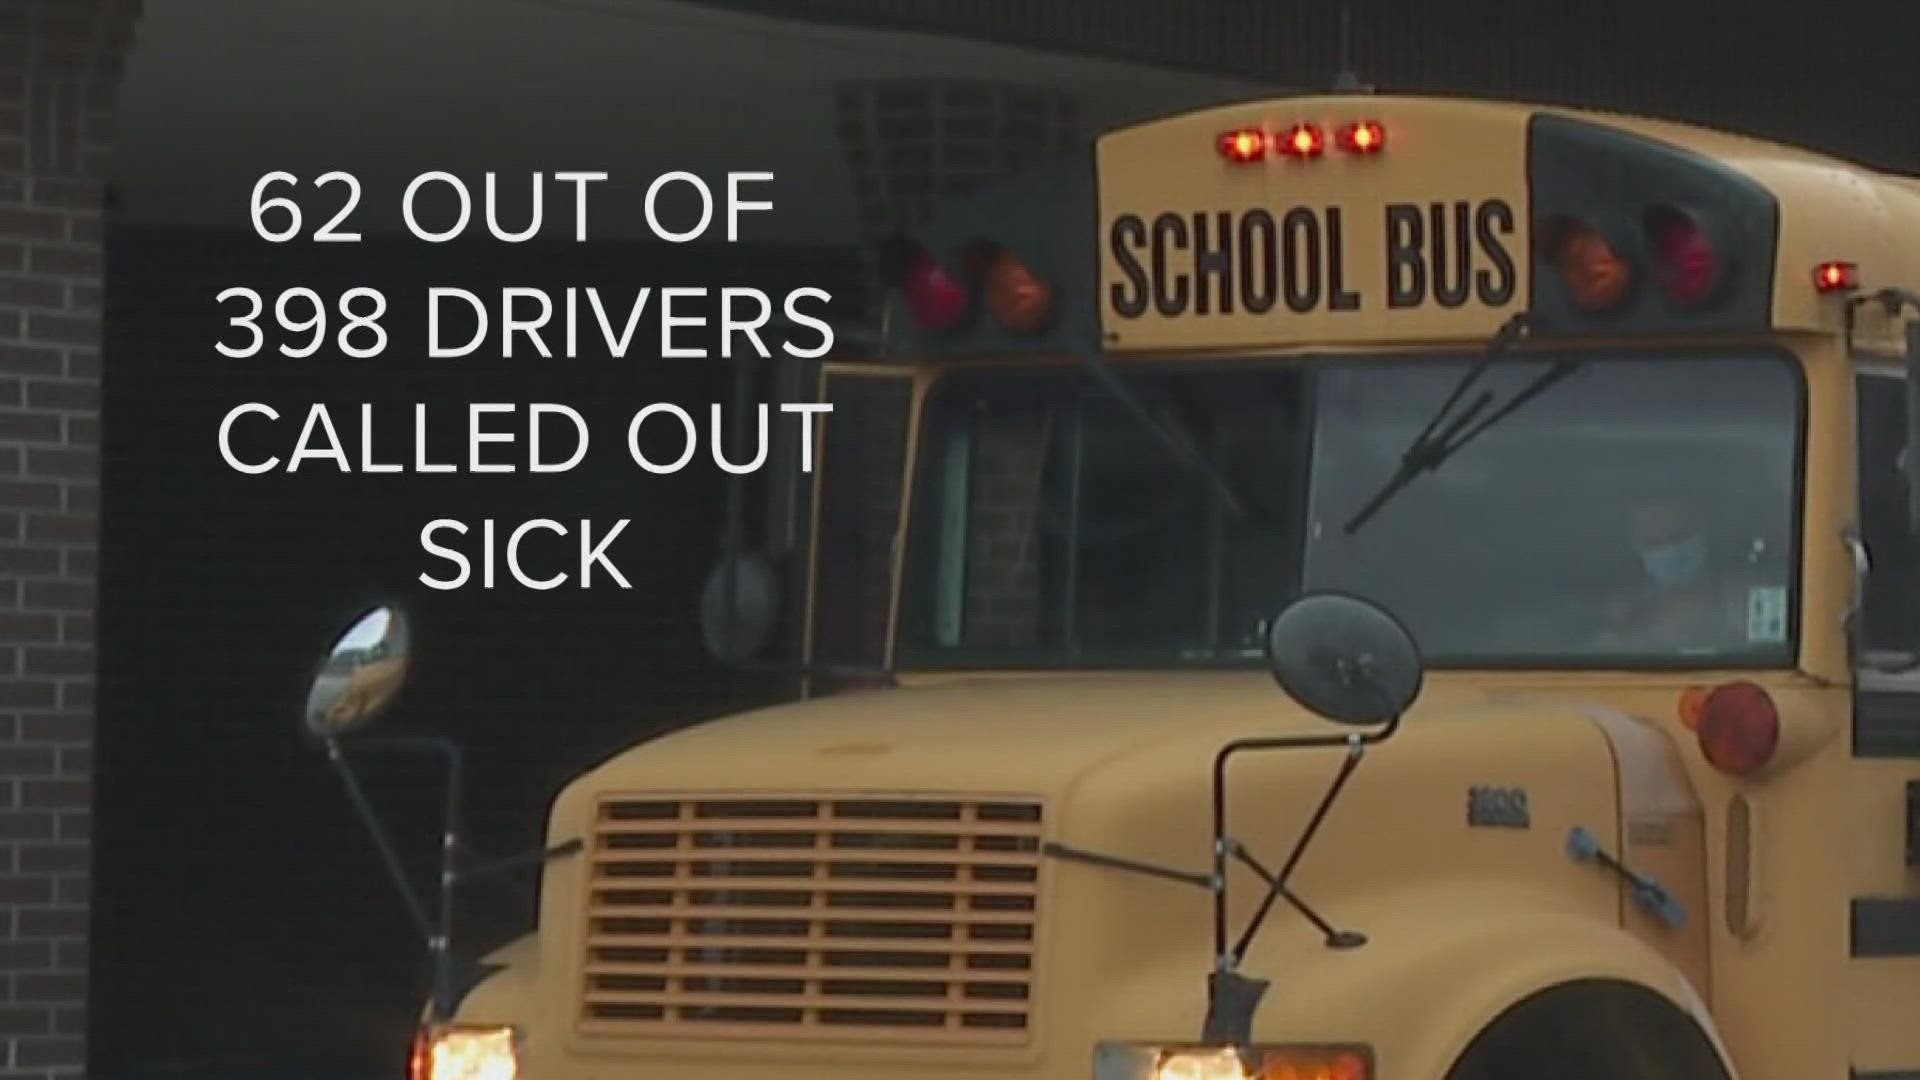 On top of other problems in the education system, bus drivers staged a sickout due to being underpaid.